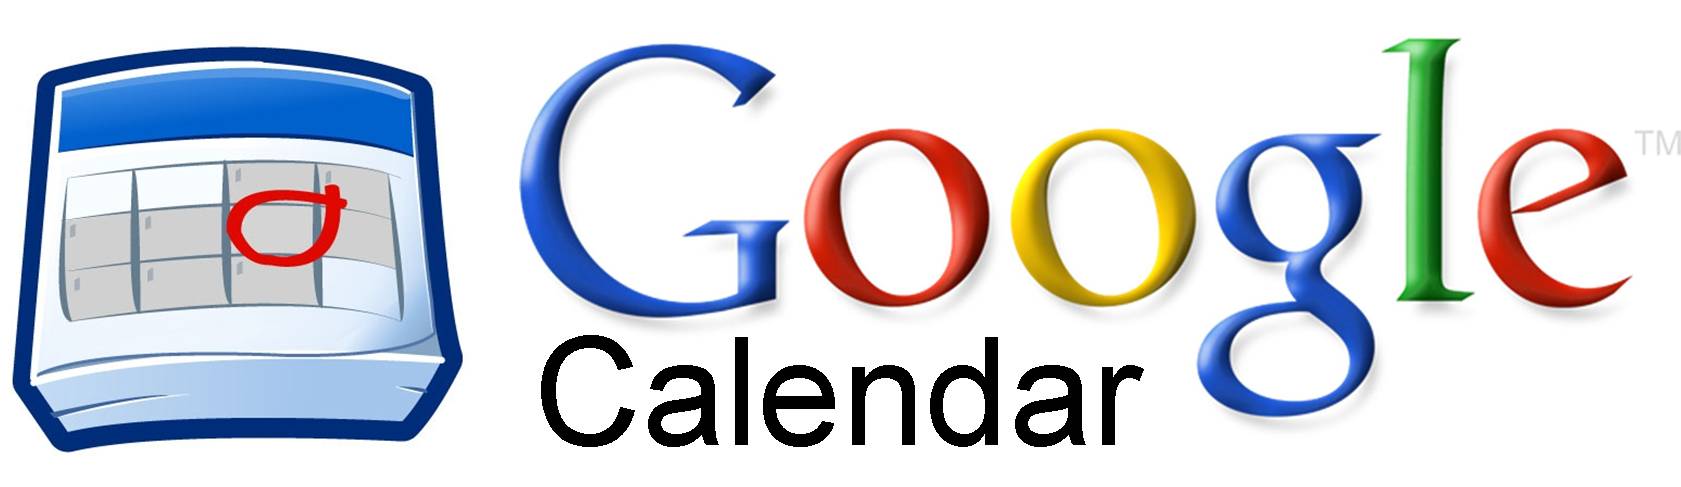 Google Calendar Logo - google calendar logo - The Economical Excursionists